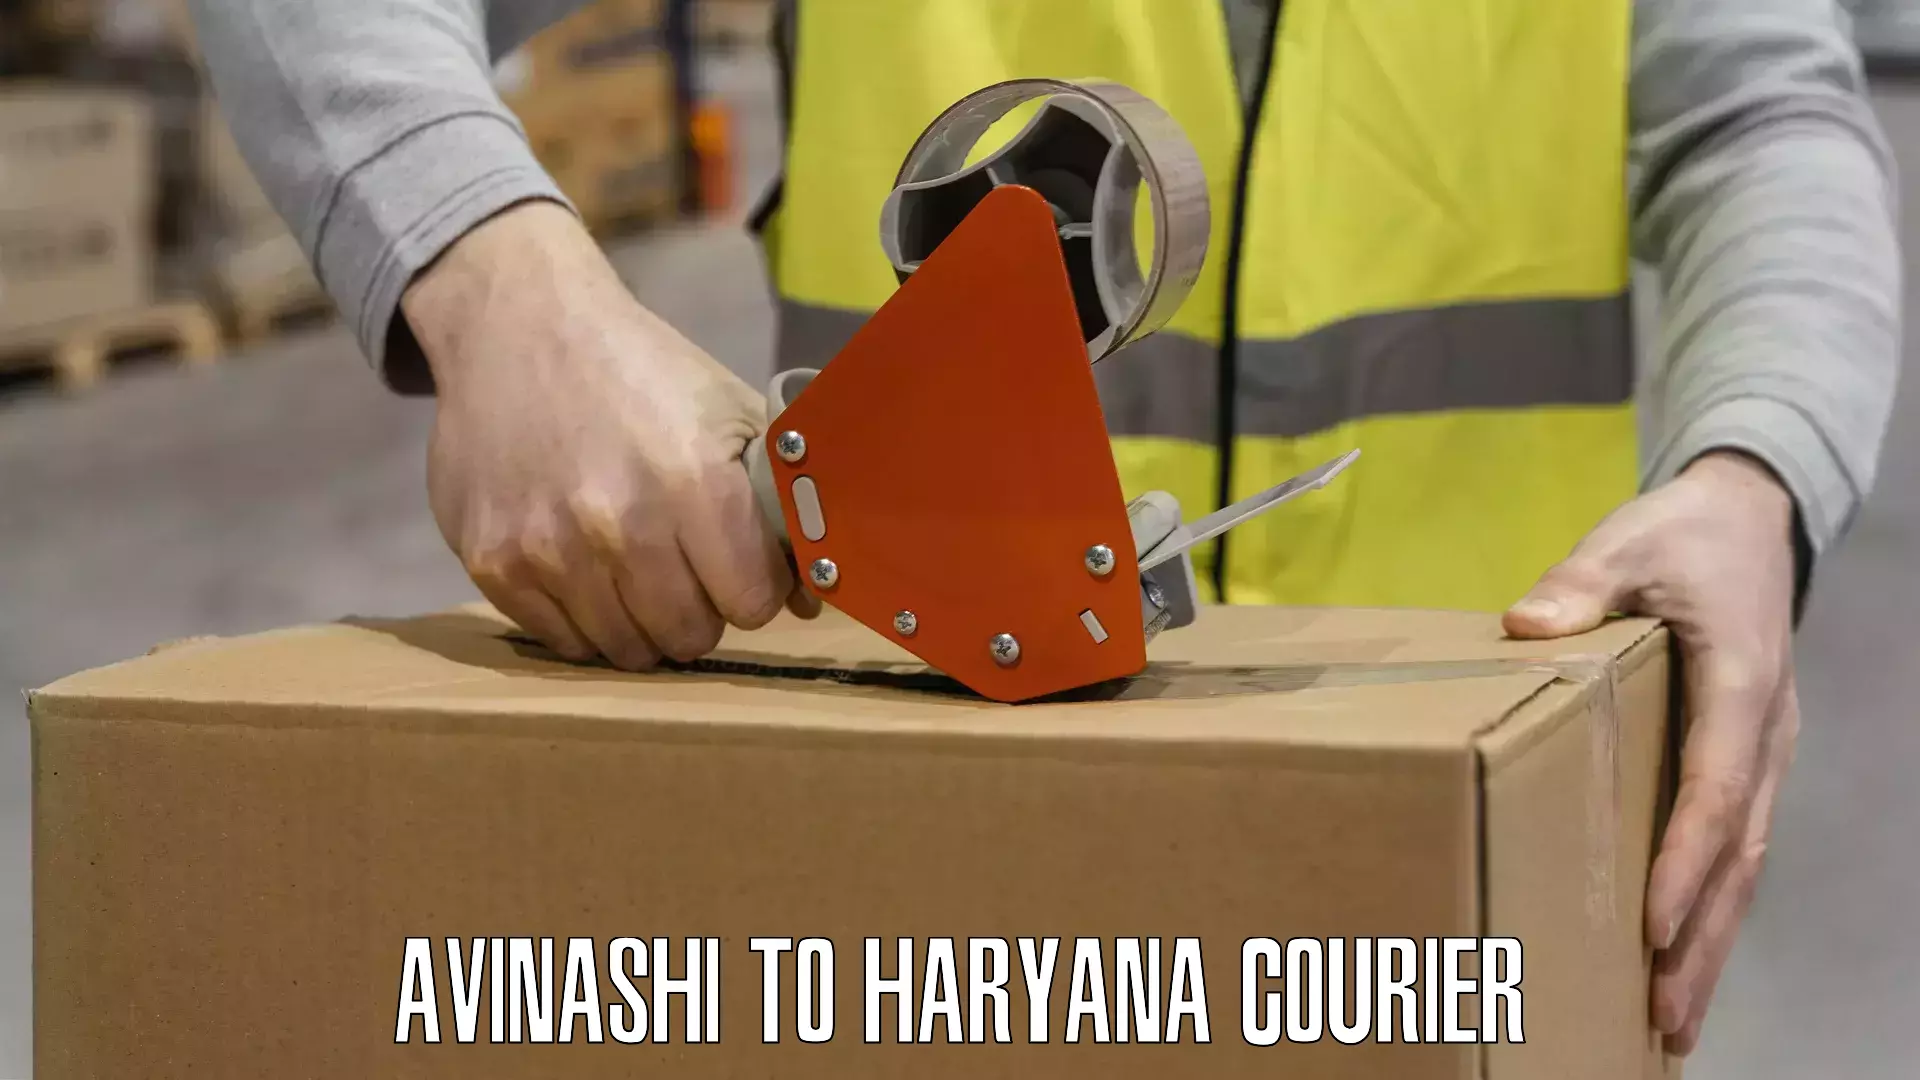 Versatile courier offerings Avinashi to Chaudhary Charan Singh Haryana Agricultural University Hisar